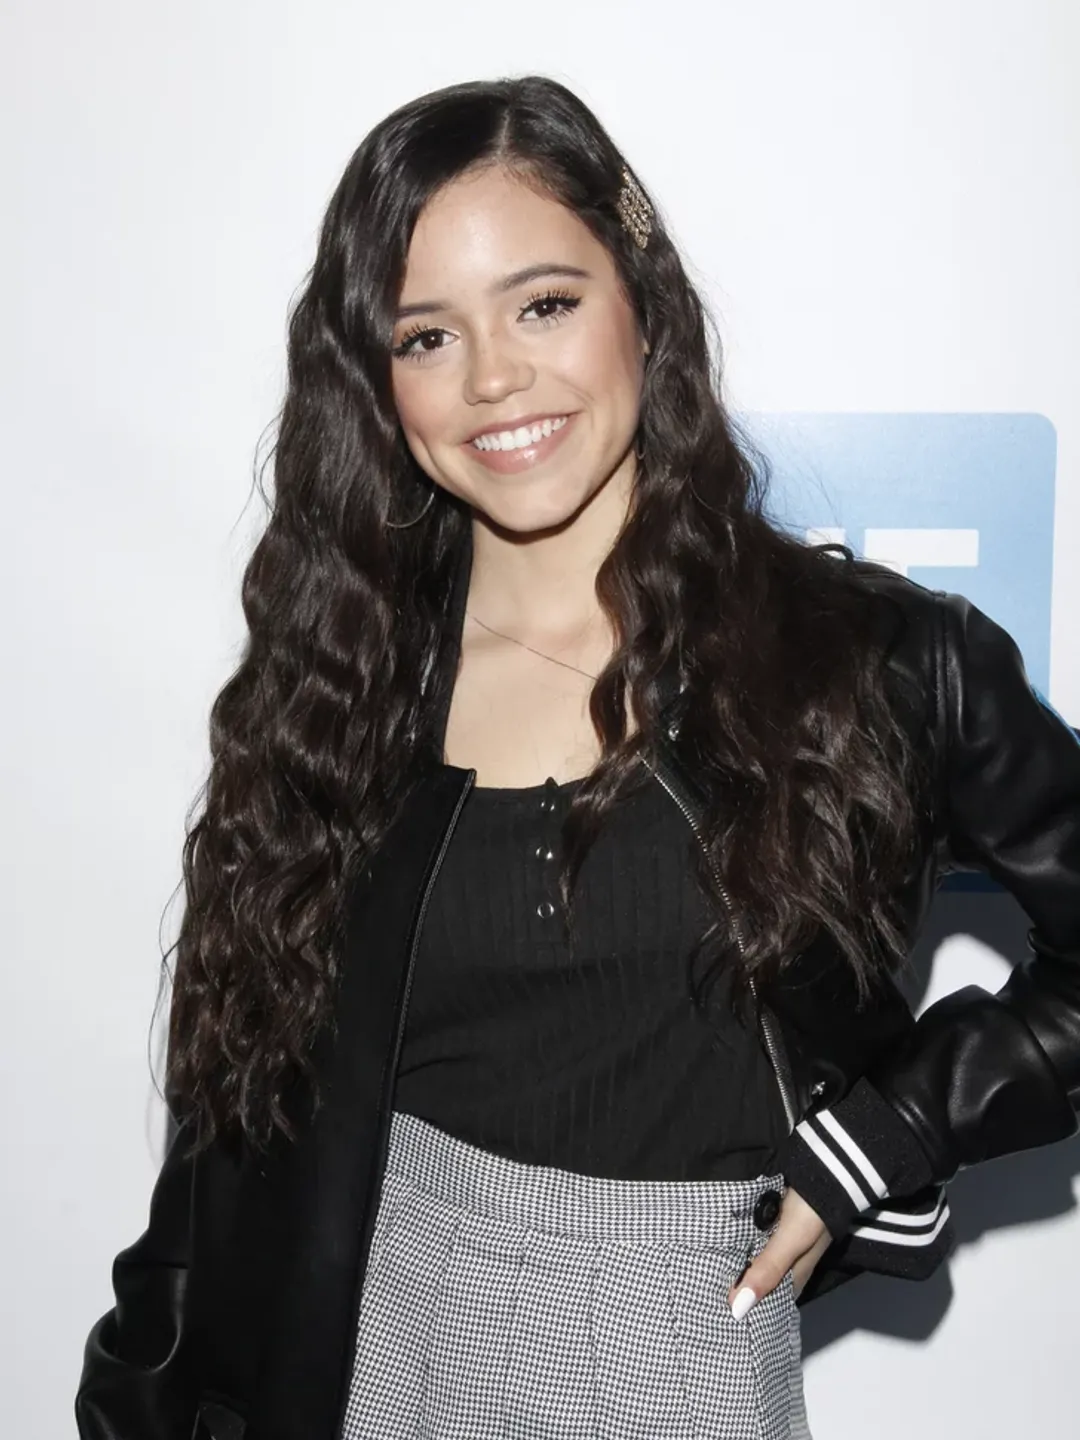 Jenna Ortega who is her father